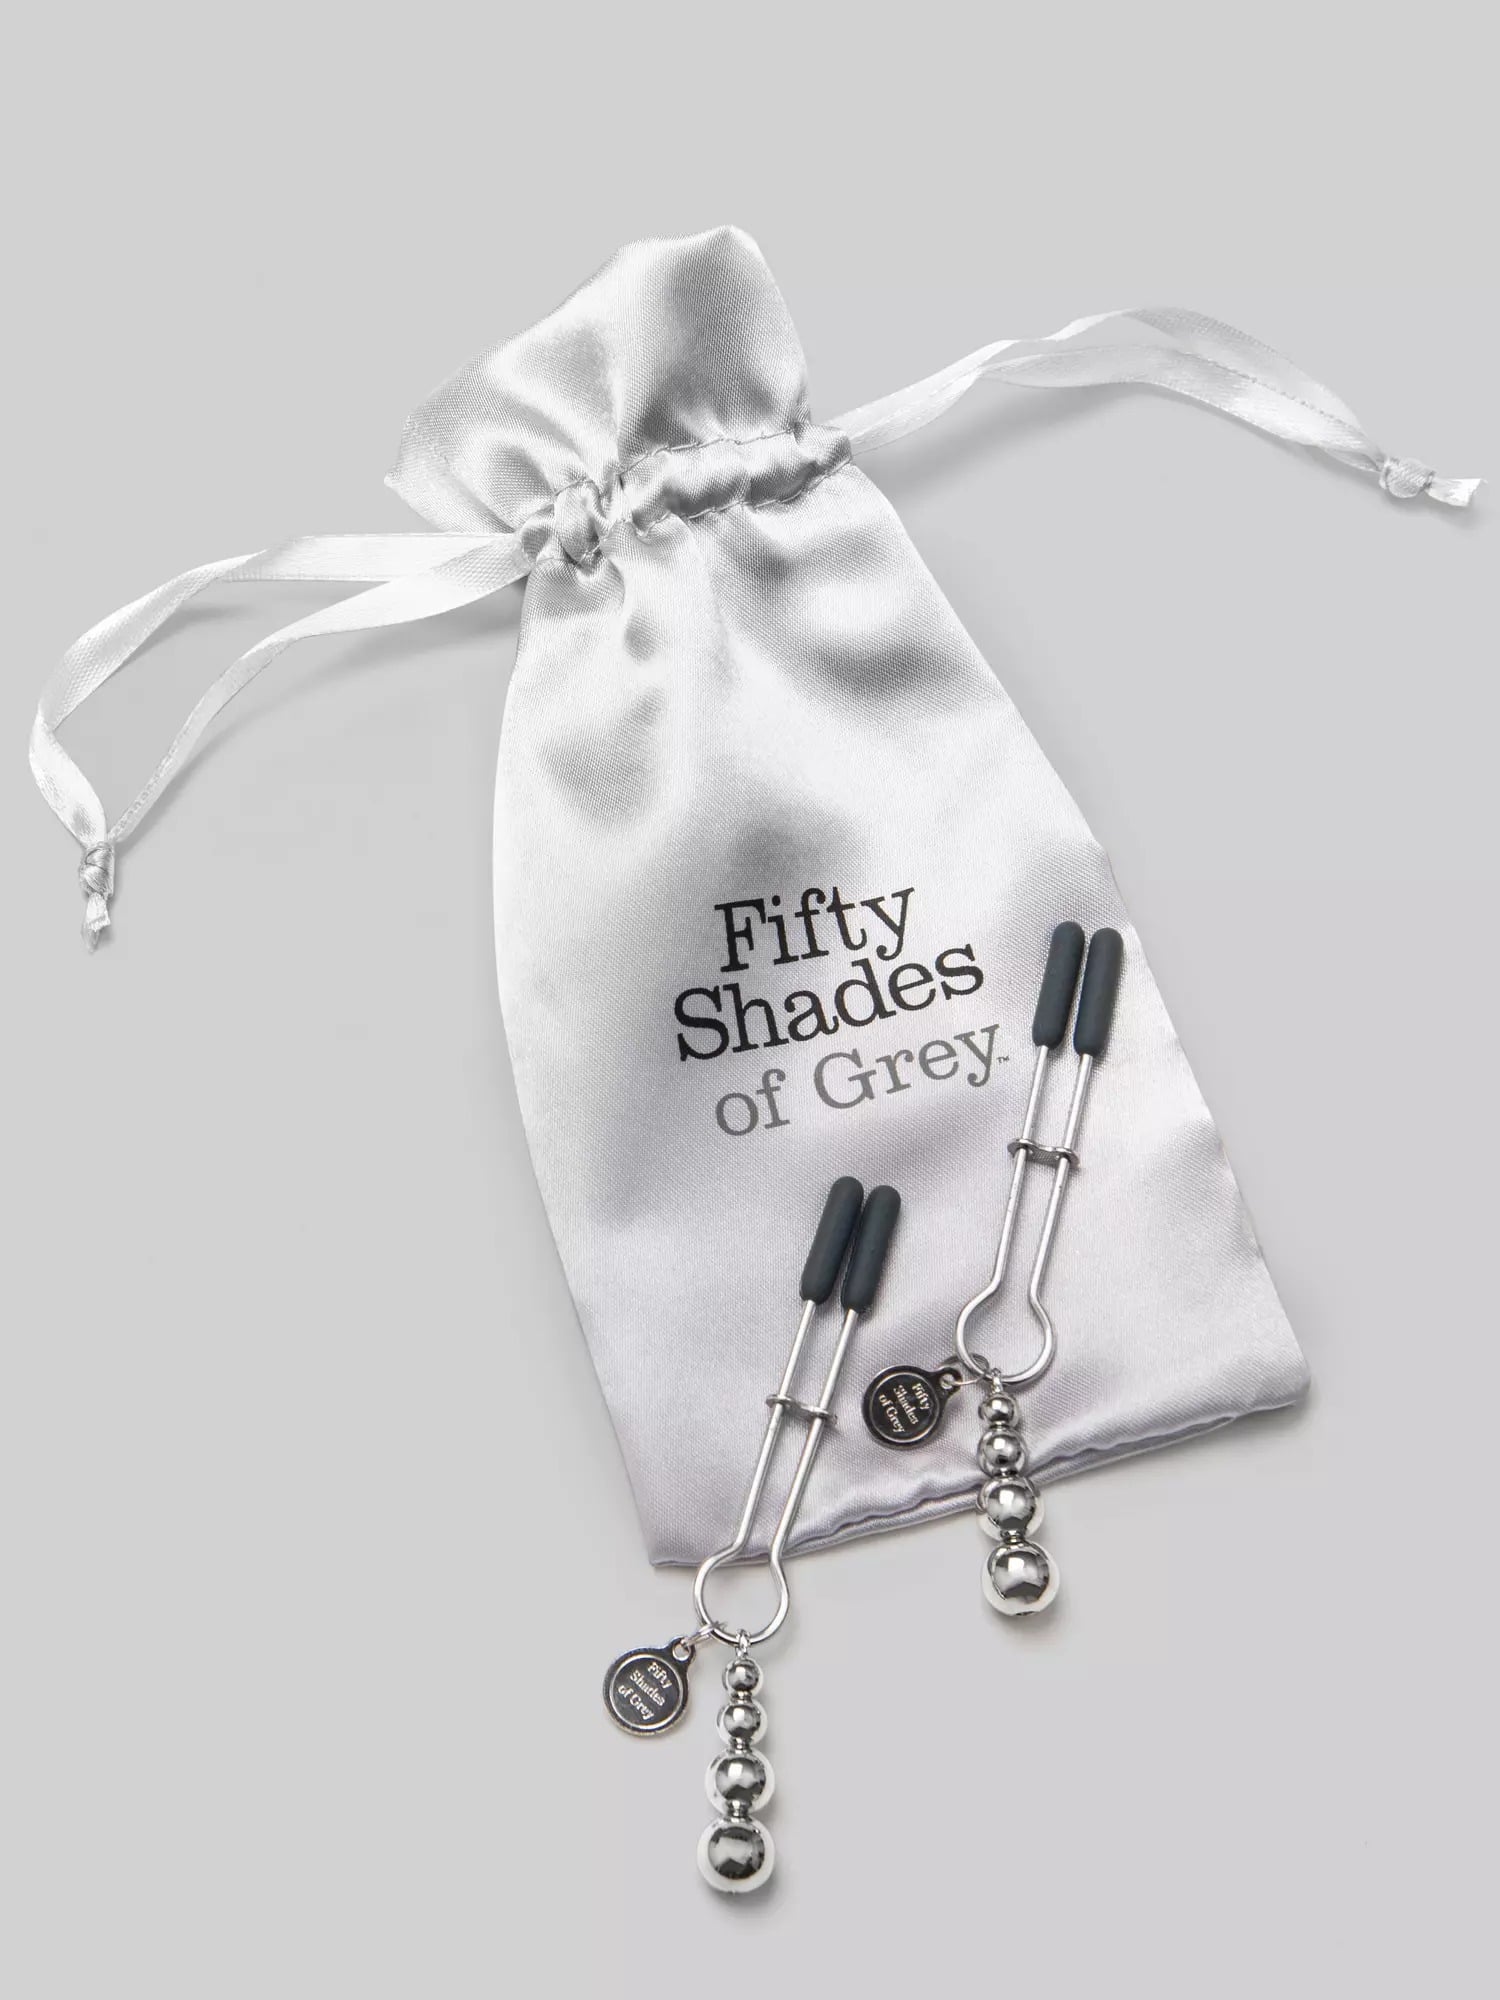 Fifty Shades of Grey The Pinch Adjustable Nipple Clamps. Slide 15